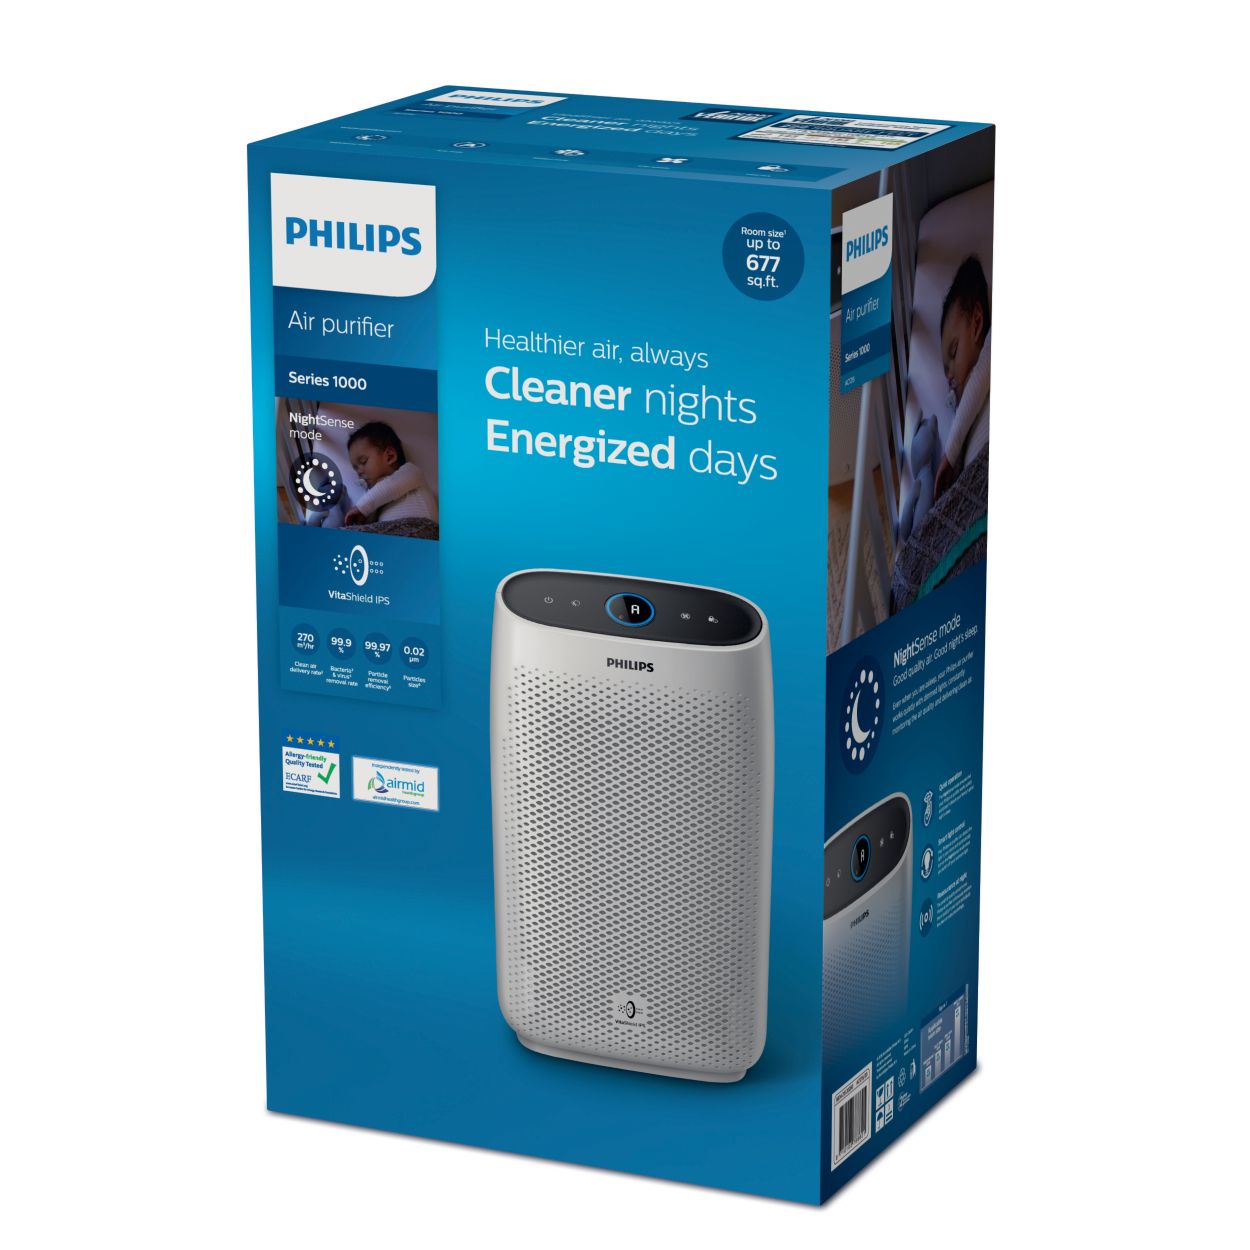 Honeywell Vs Philips Air Purifier We Compare The Differences